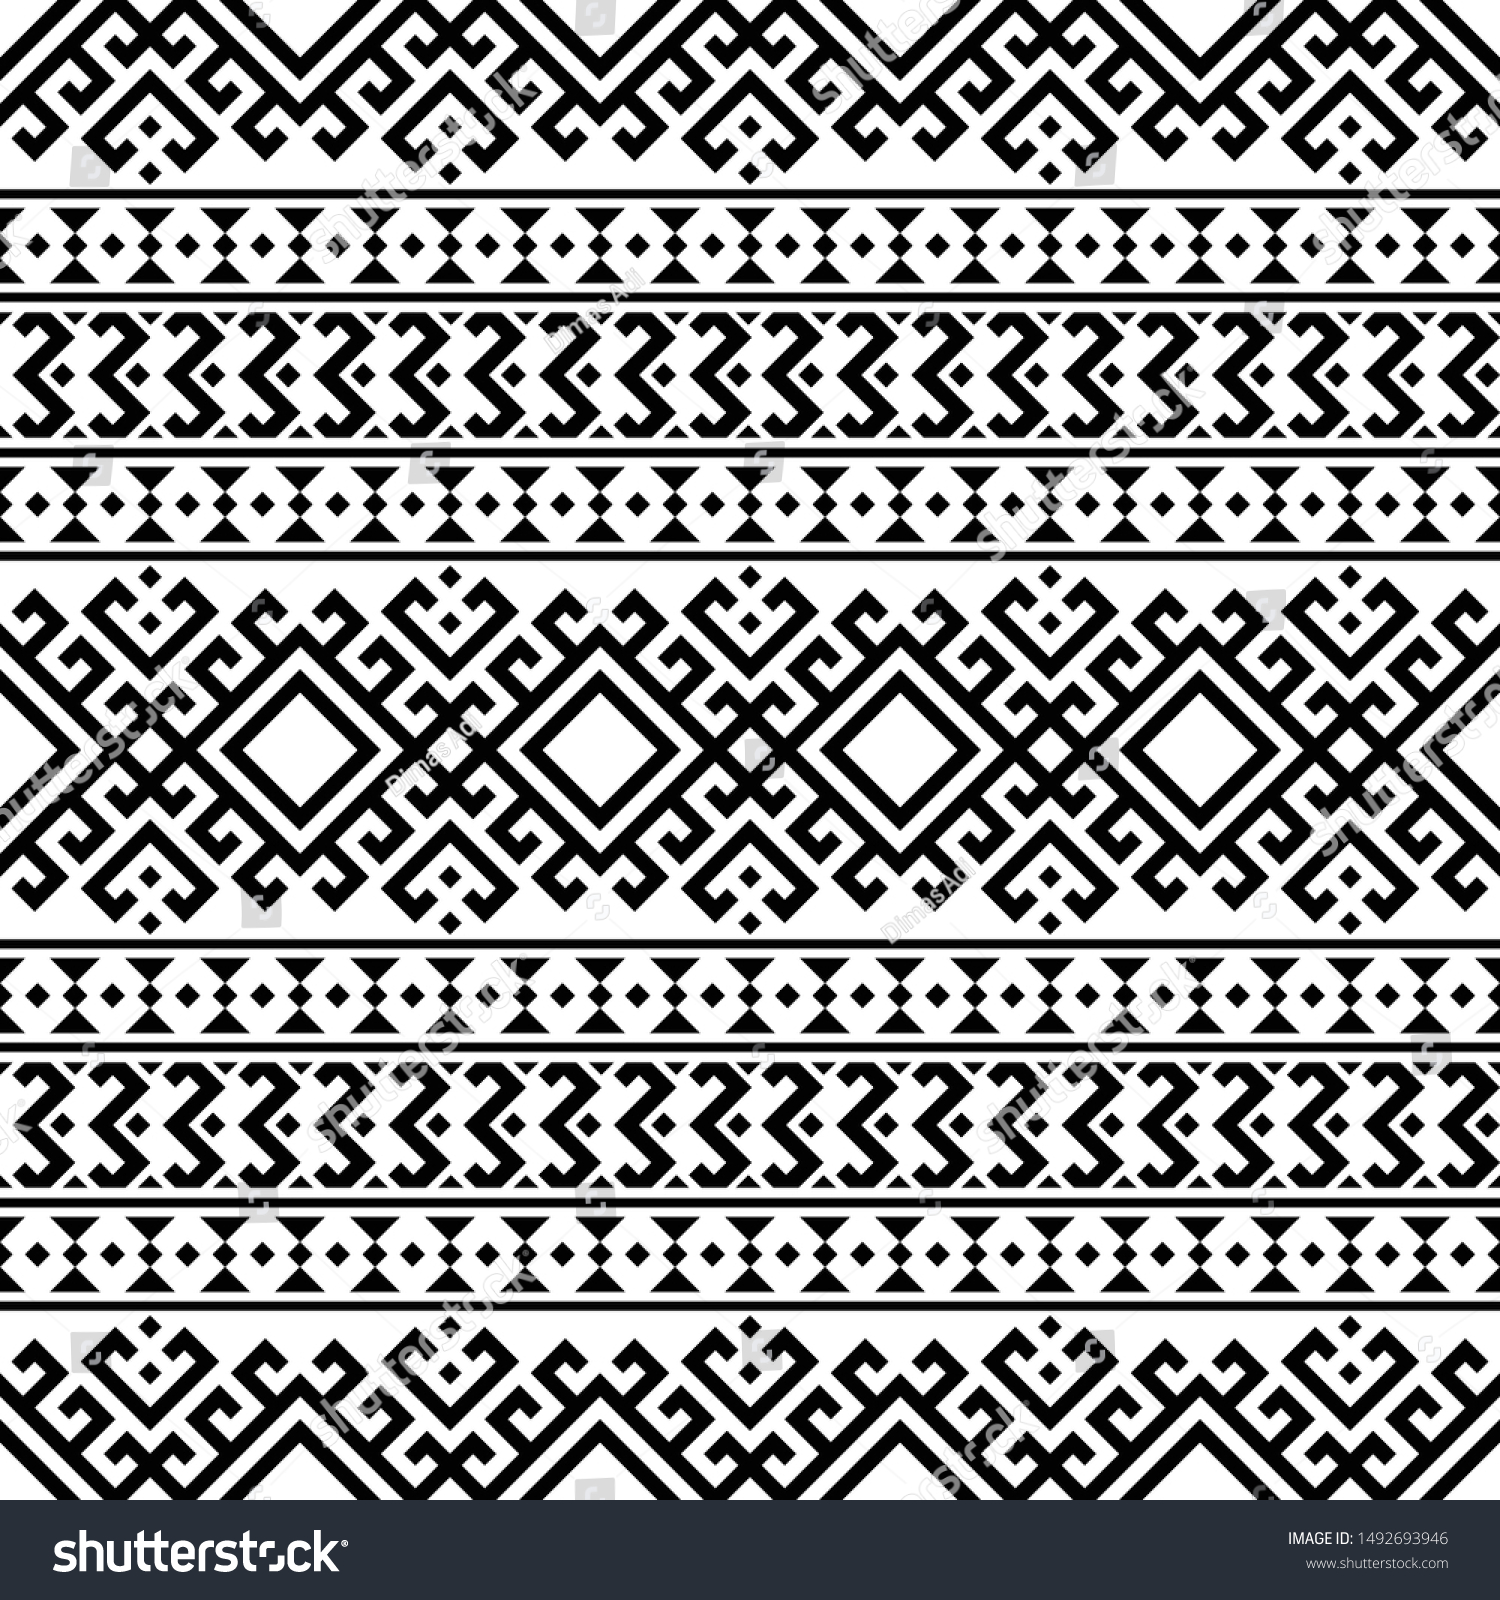 Vector Ethnic Seamless Pattern Black White Stock Vector (Royalty Free ...